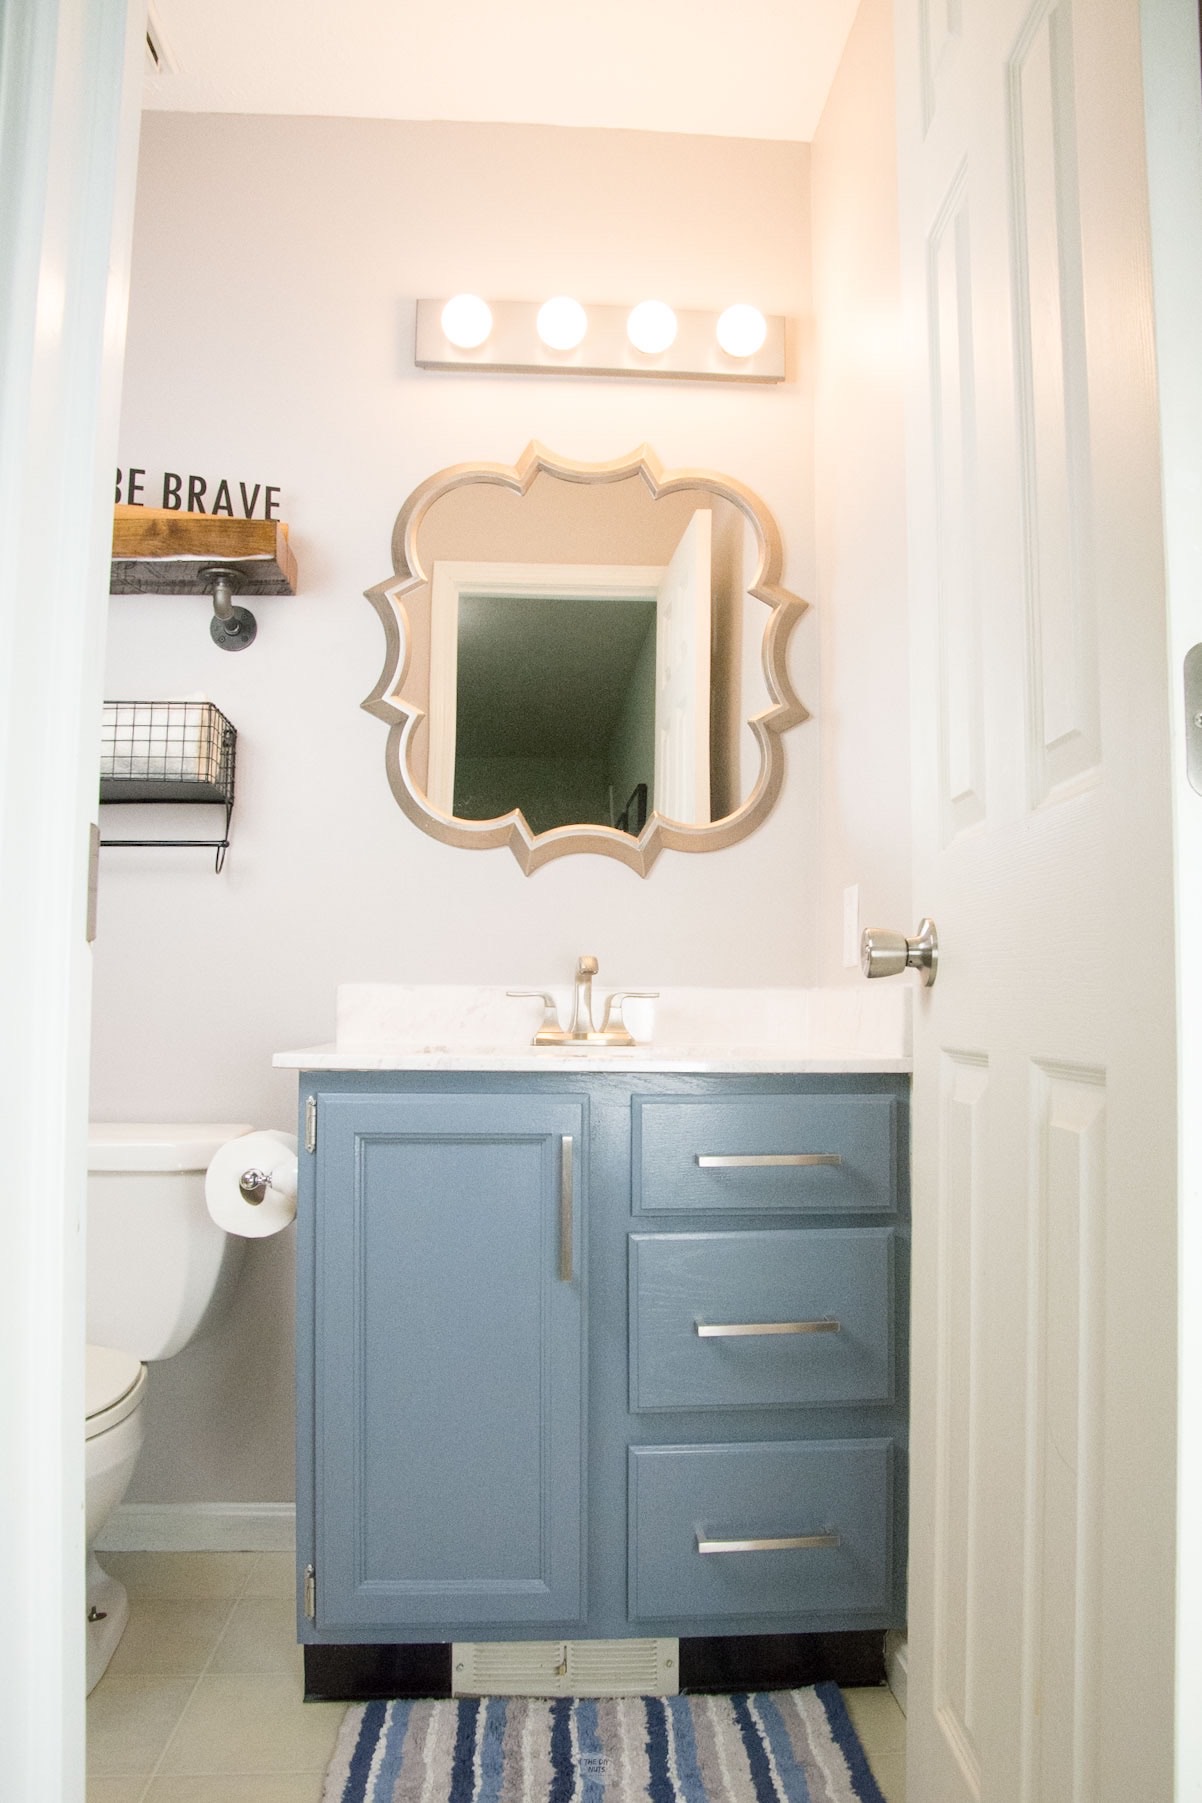 painted bathroom vanity cabinets with mirror and painted light fixture.